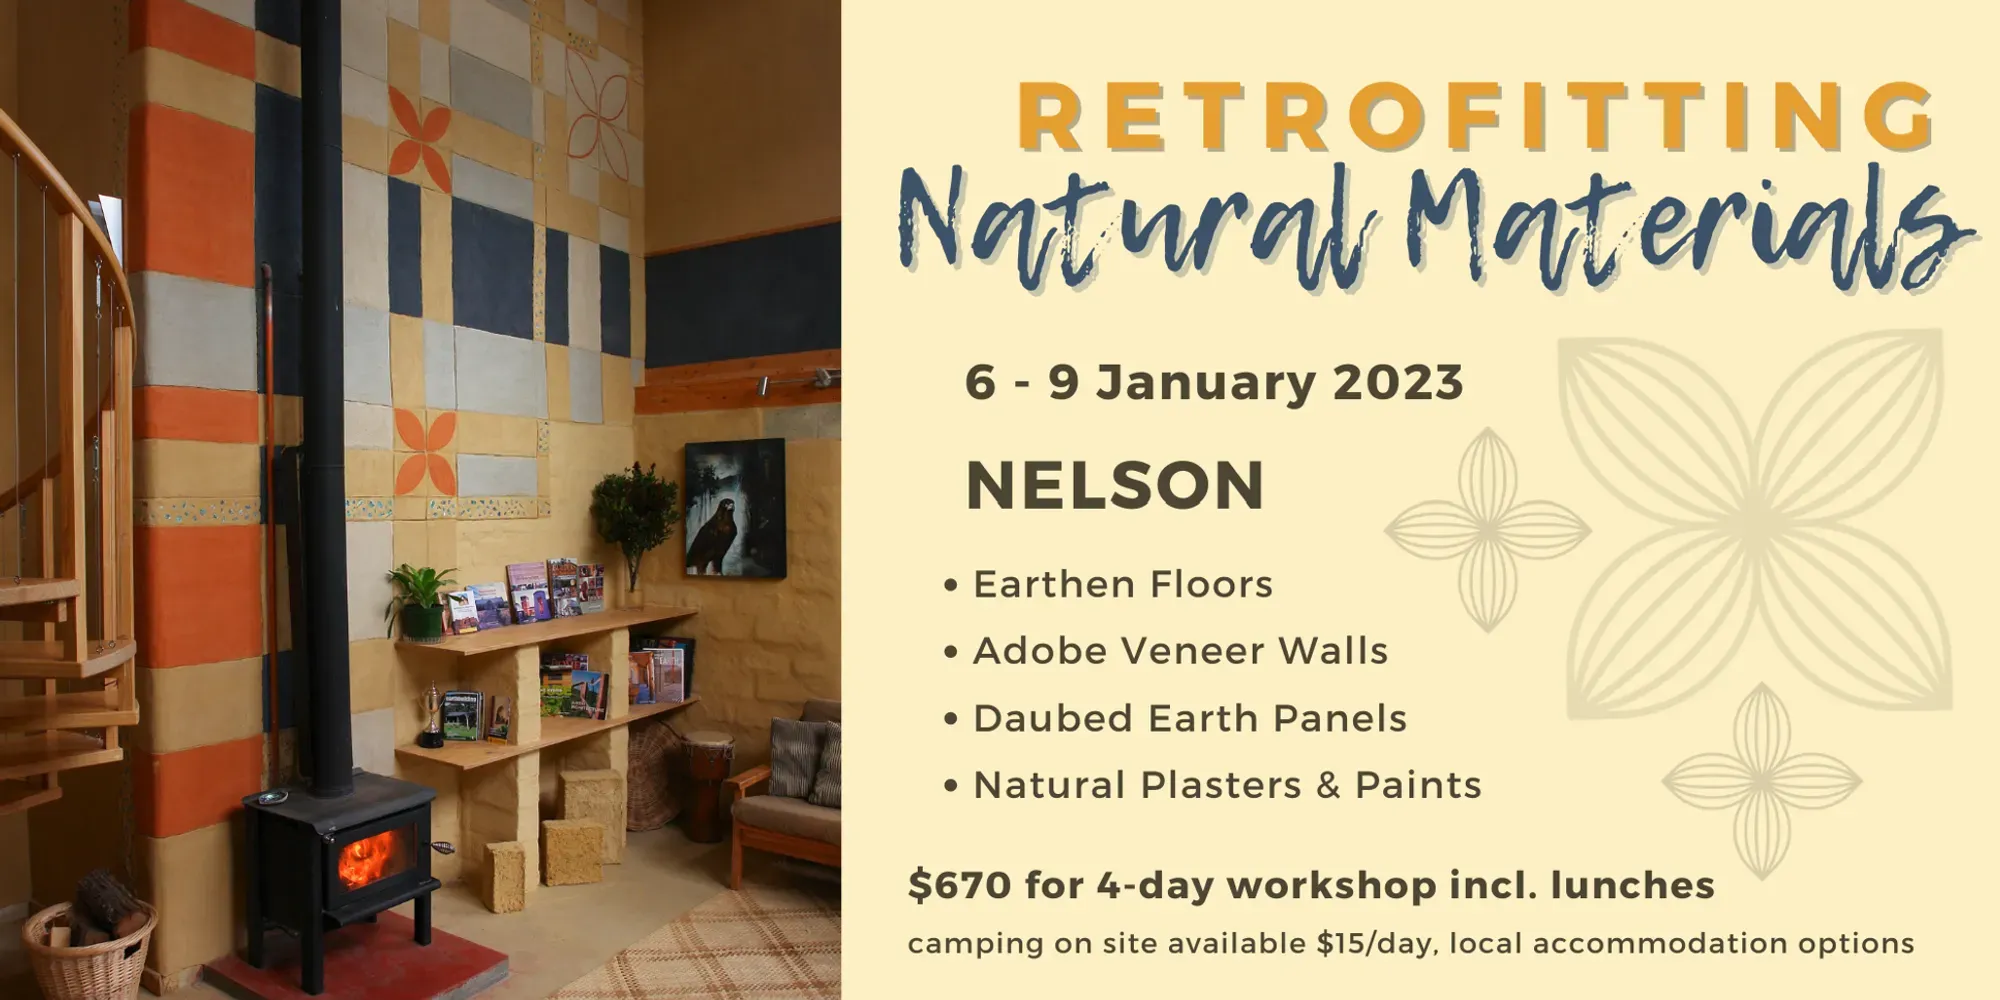 Retrofitting with Natural Materials Workshop